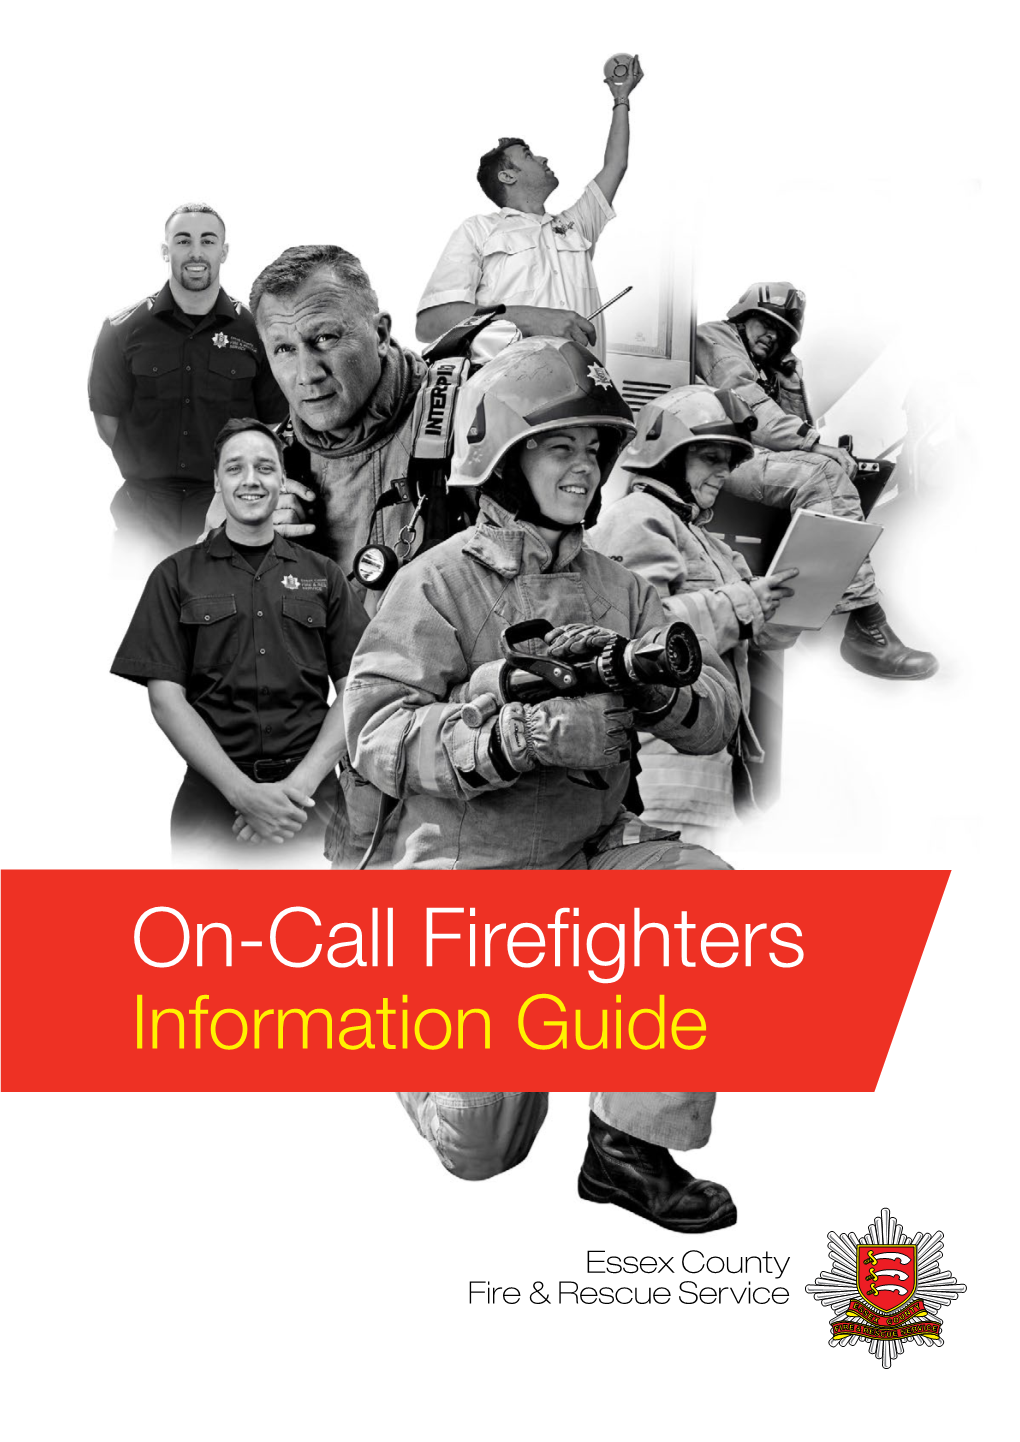 On-Call Firefighters Information Guide